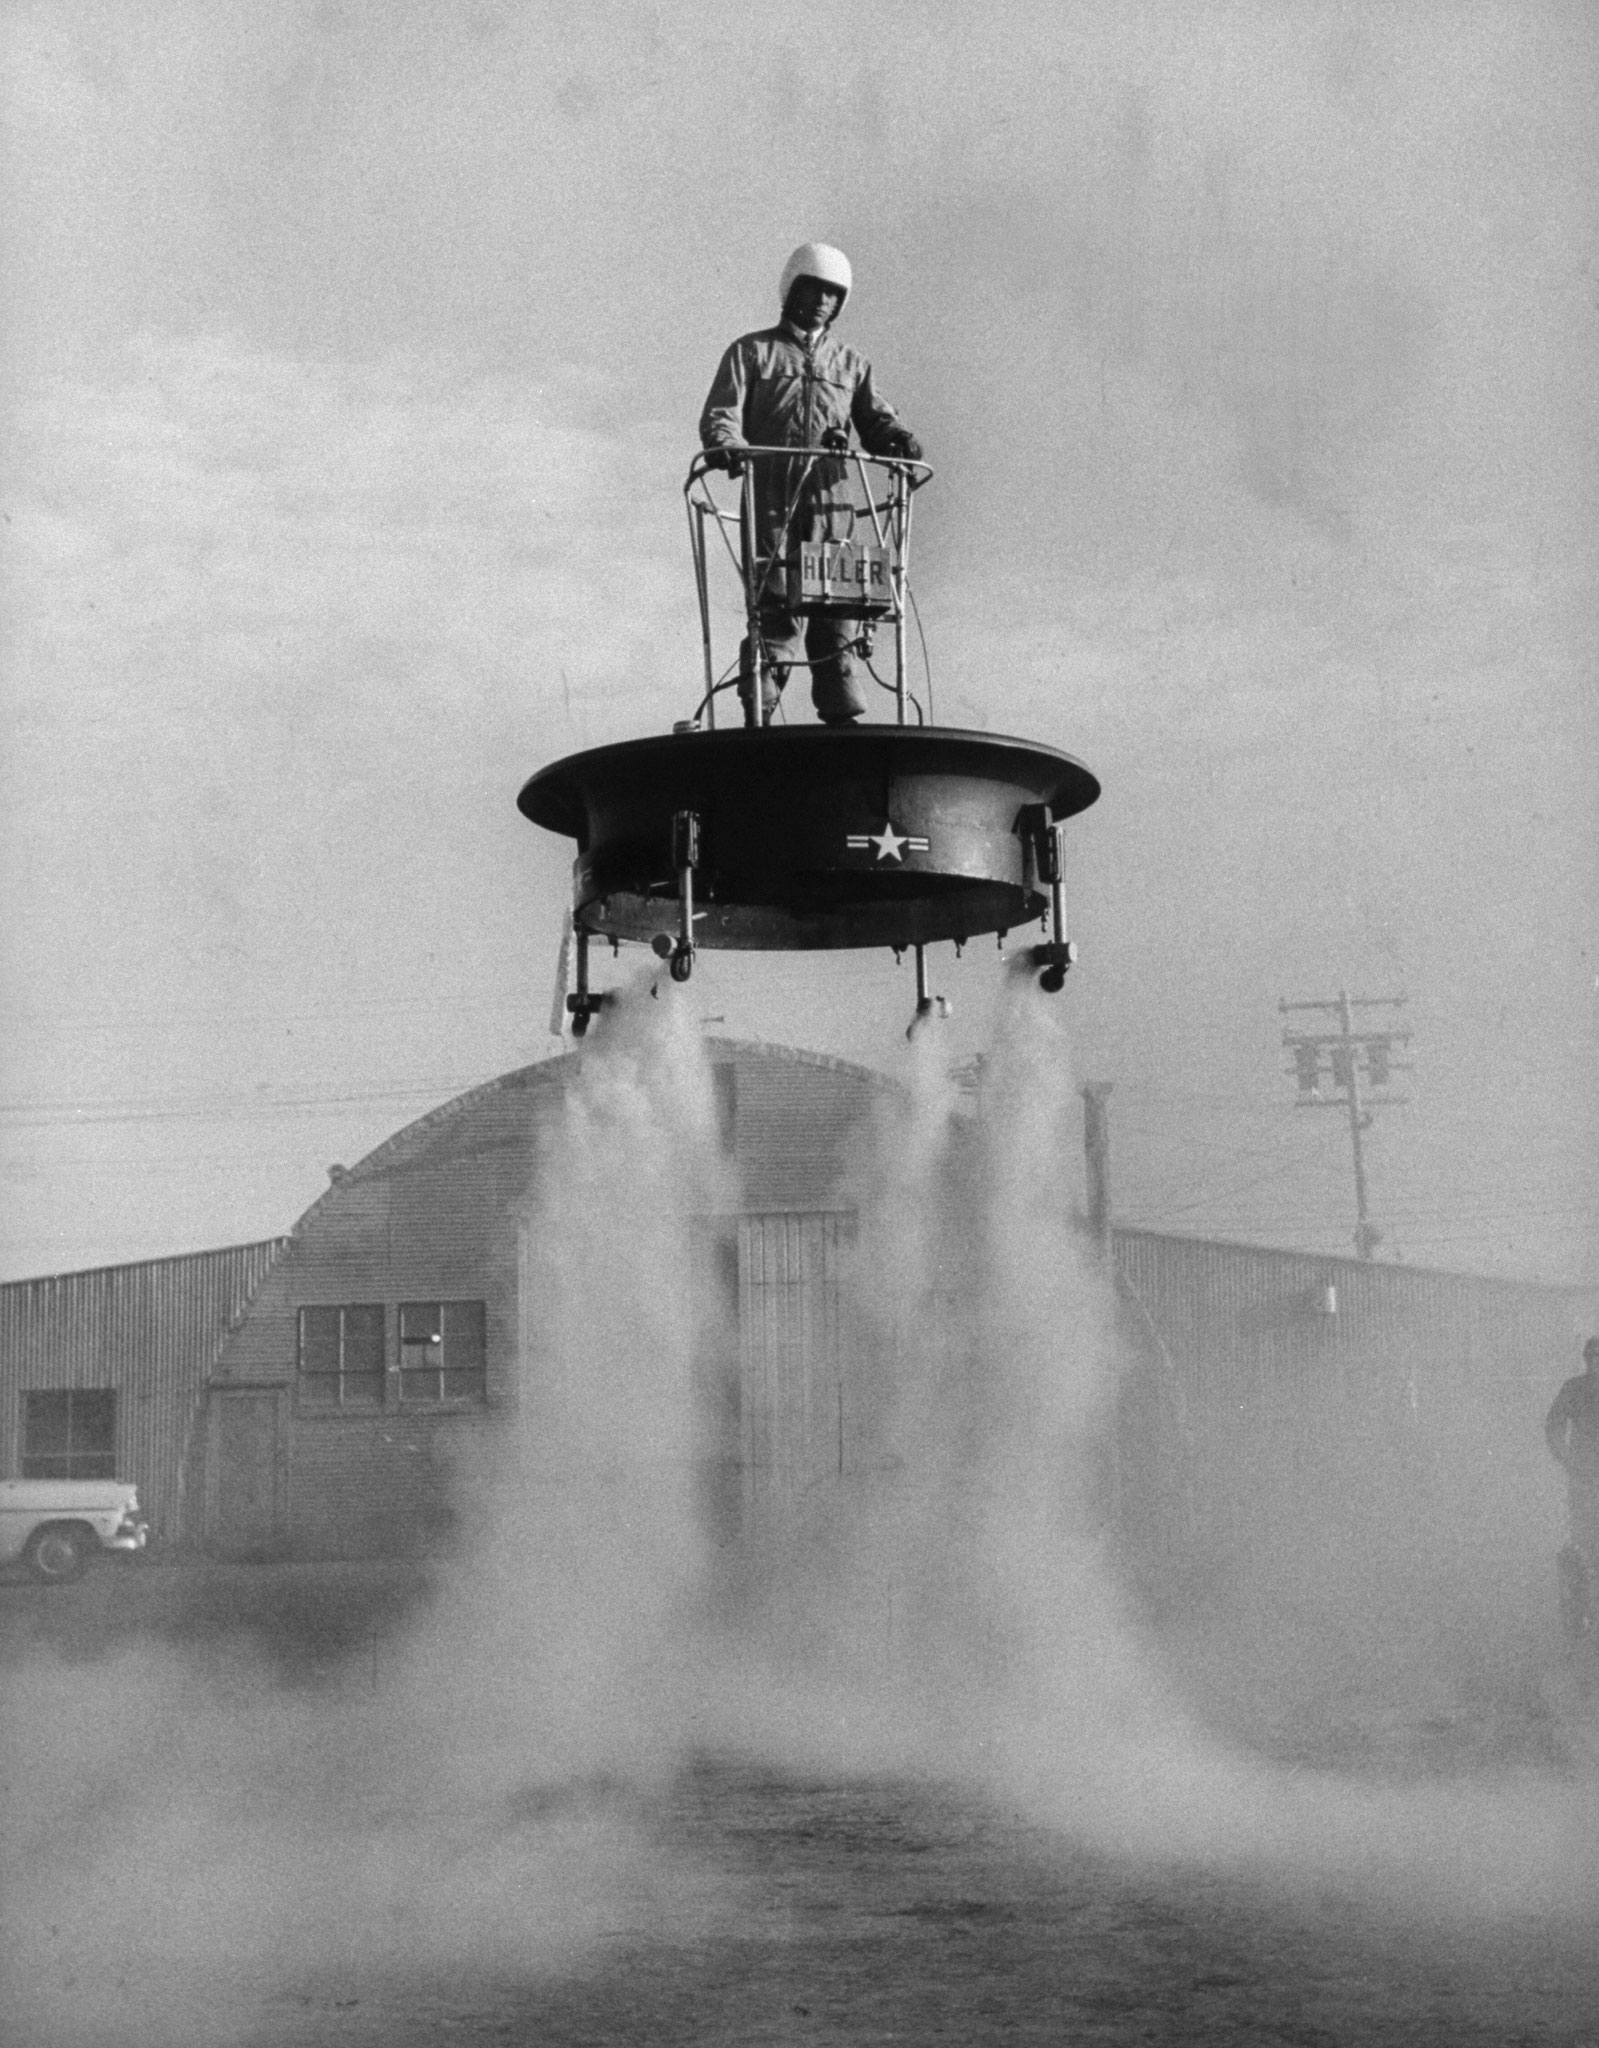 Flying platform being tested at an Air Force base, 1956.